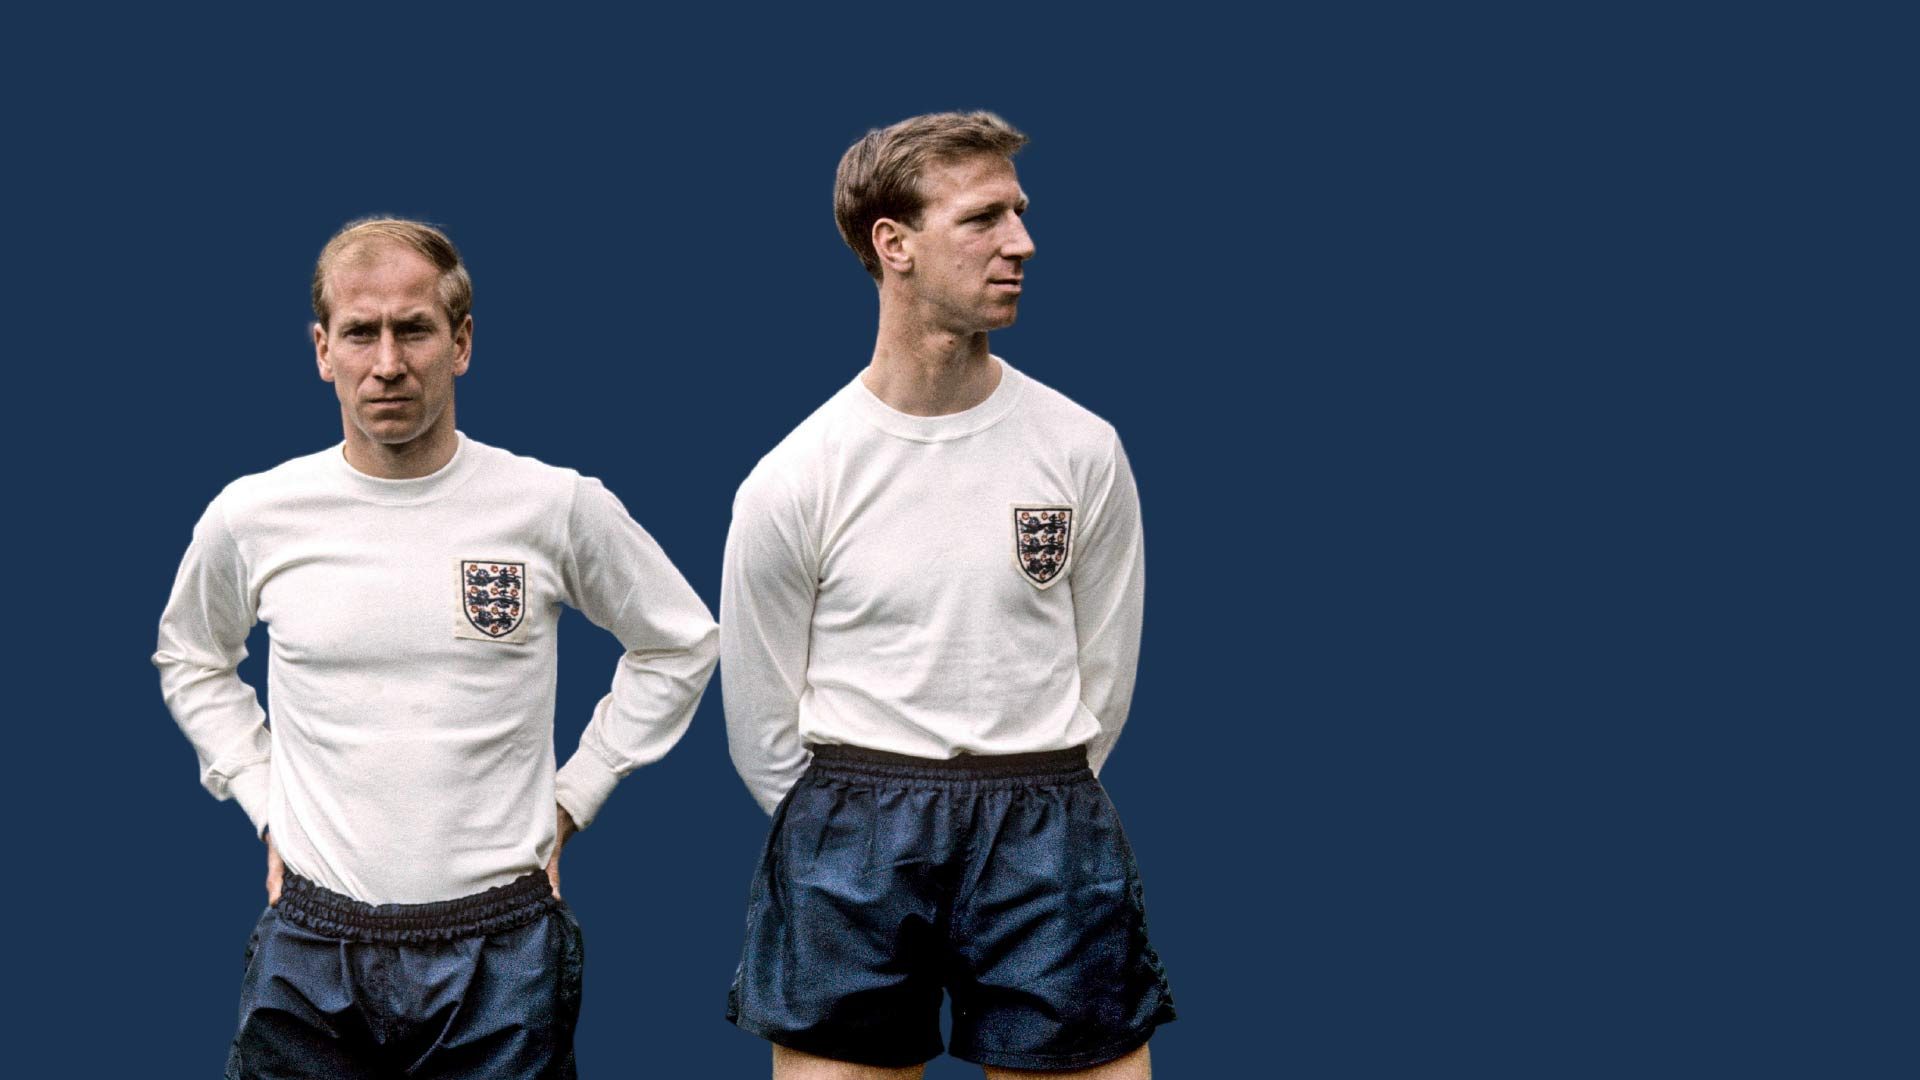 Bobby and Jack Charlton standing next to each other in England kits. Jack looks cooler